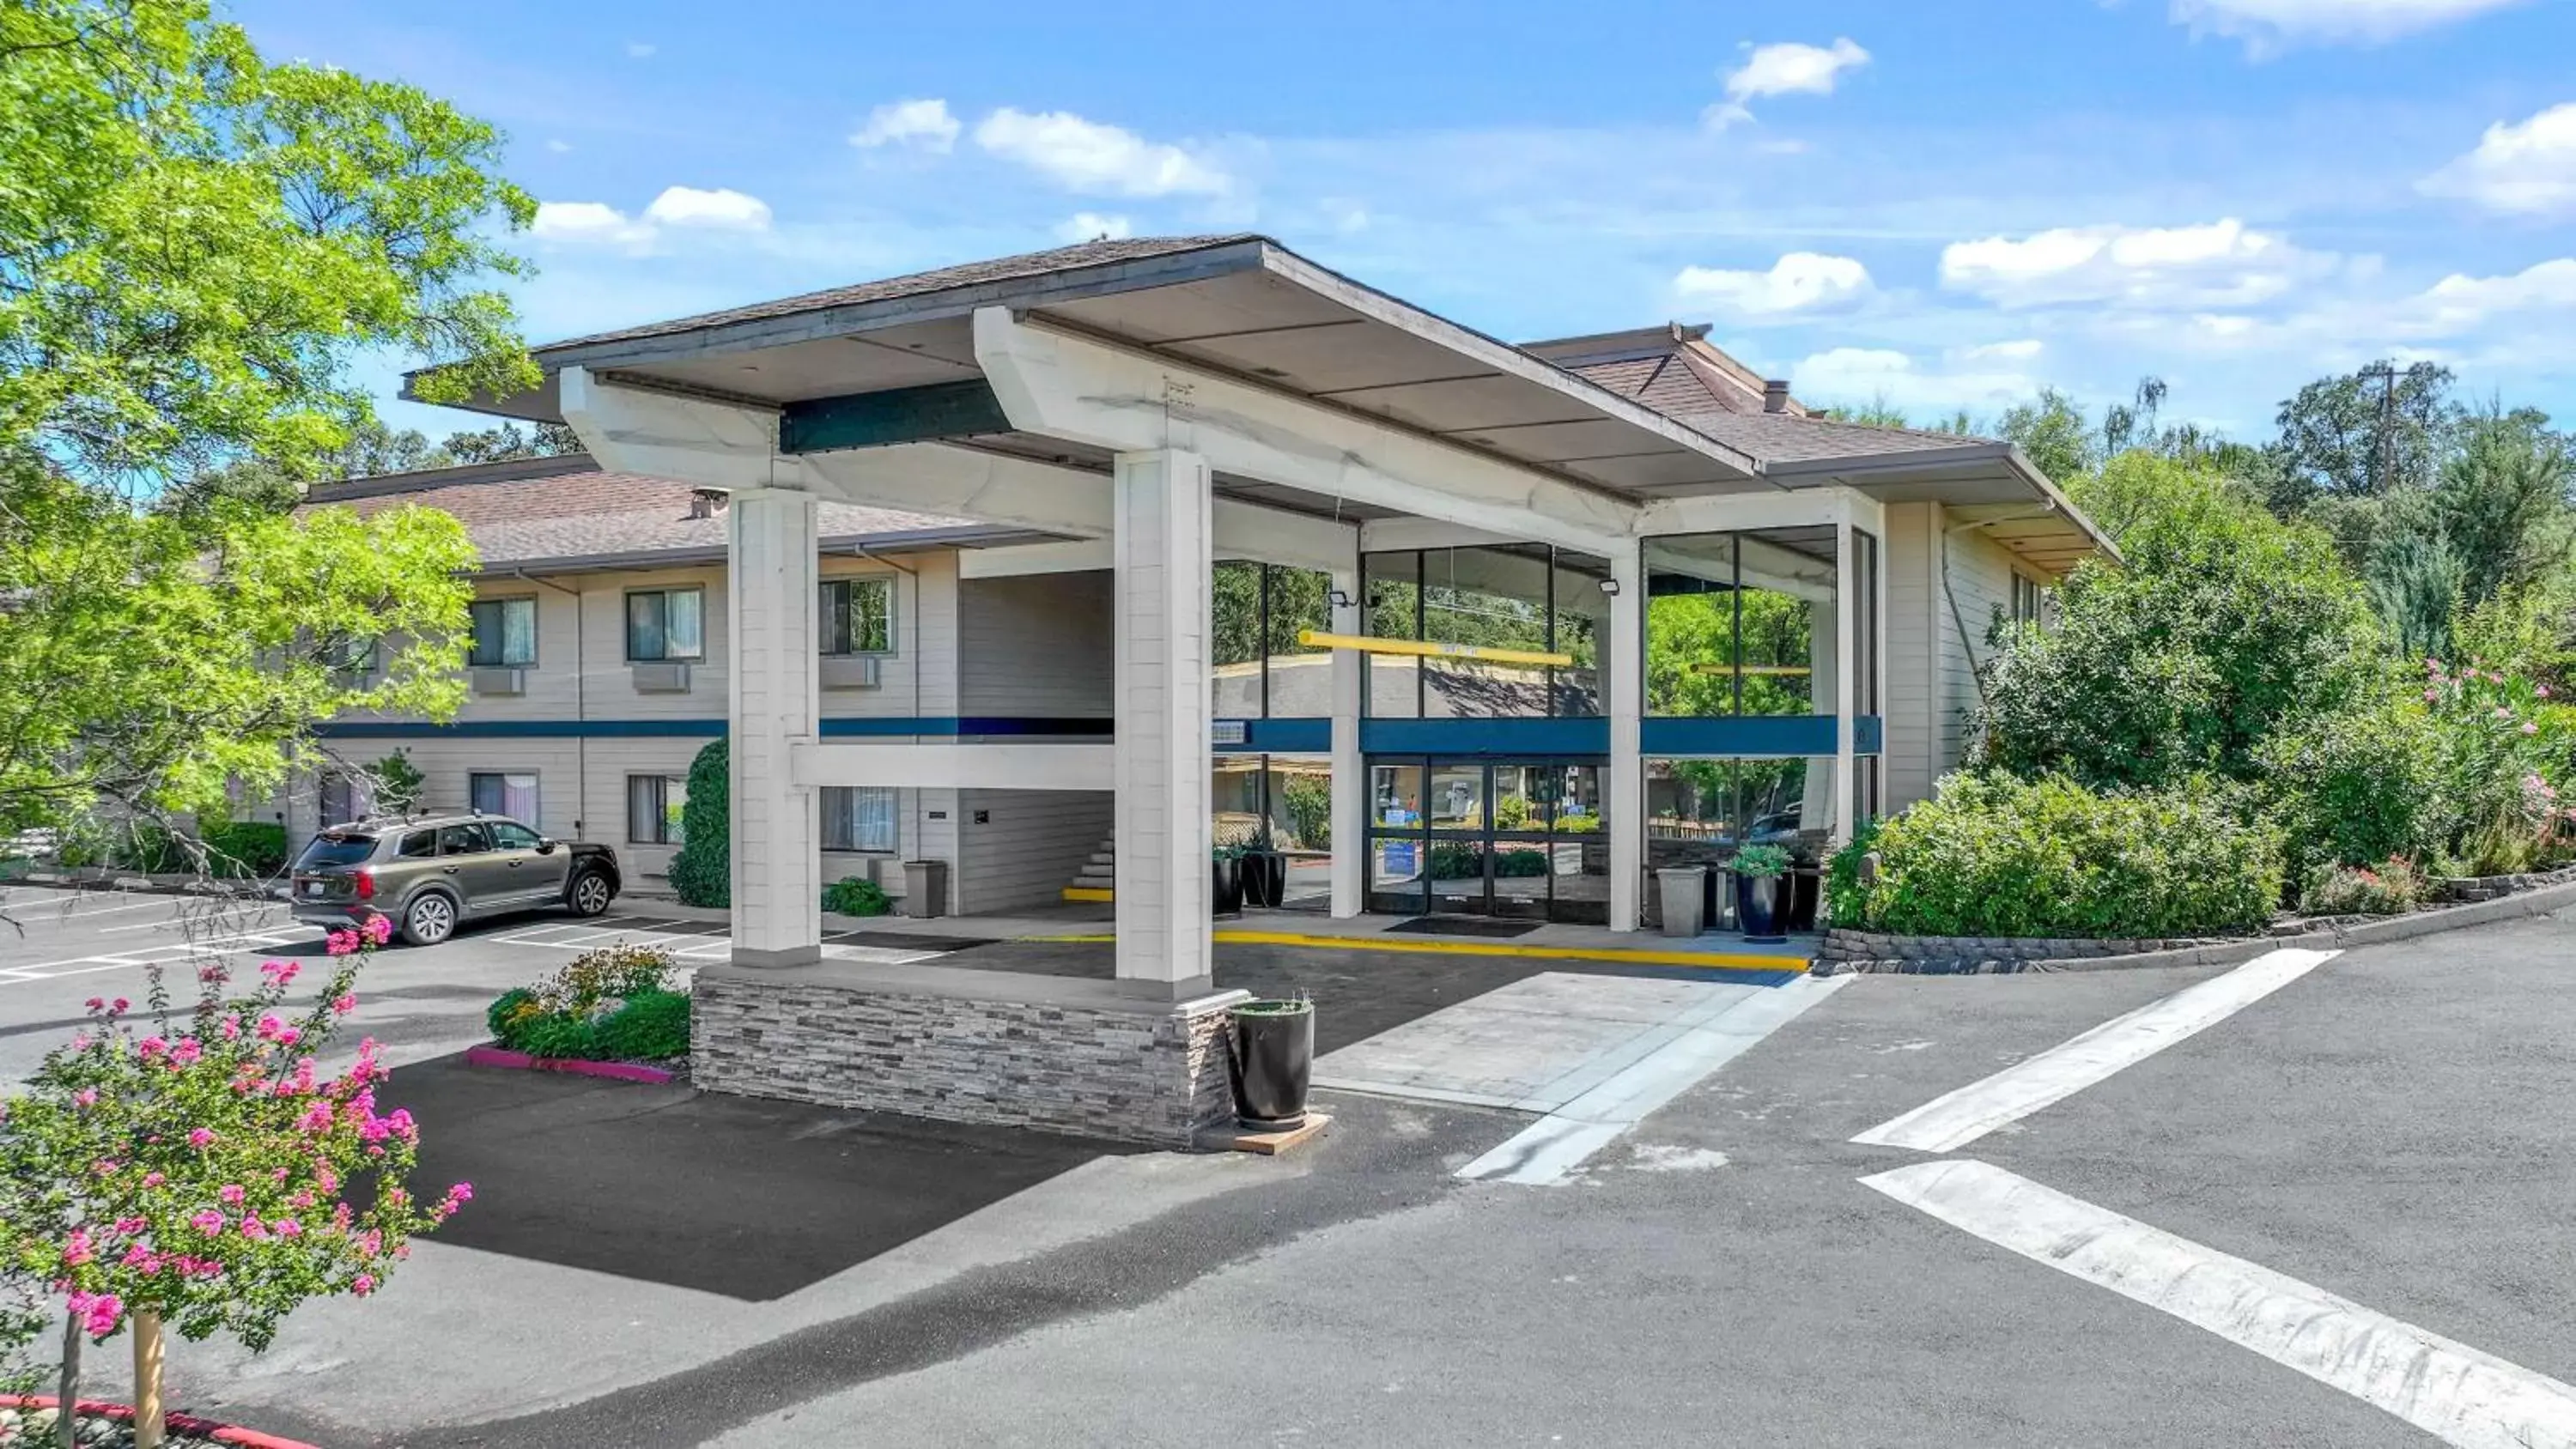 Property Building in Best Western Plus Sonora Oaks Hotel and Conference Center